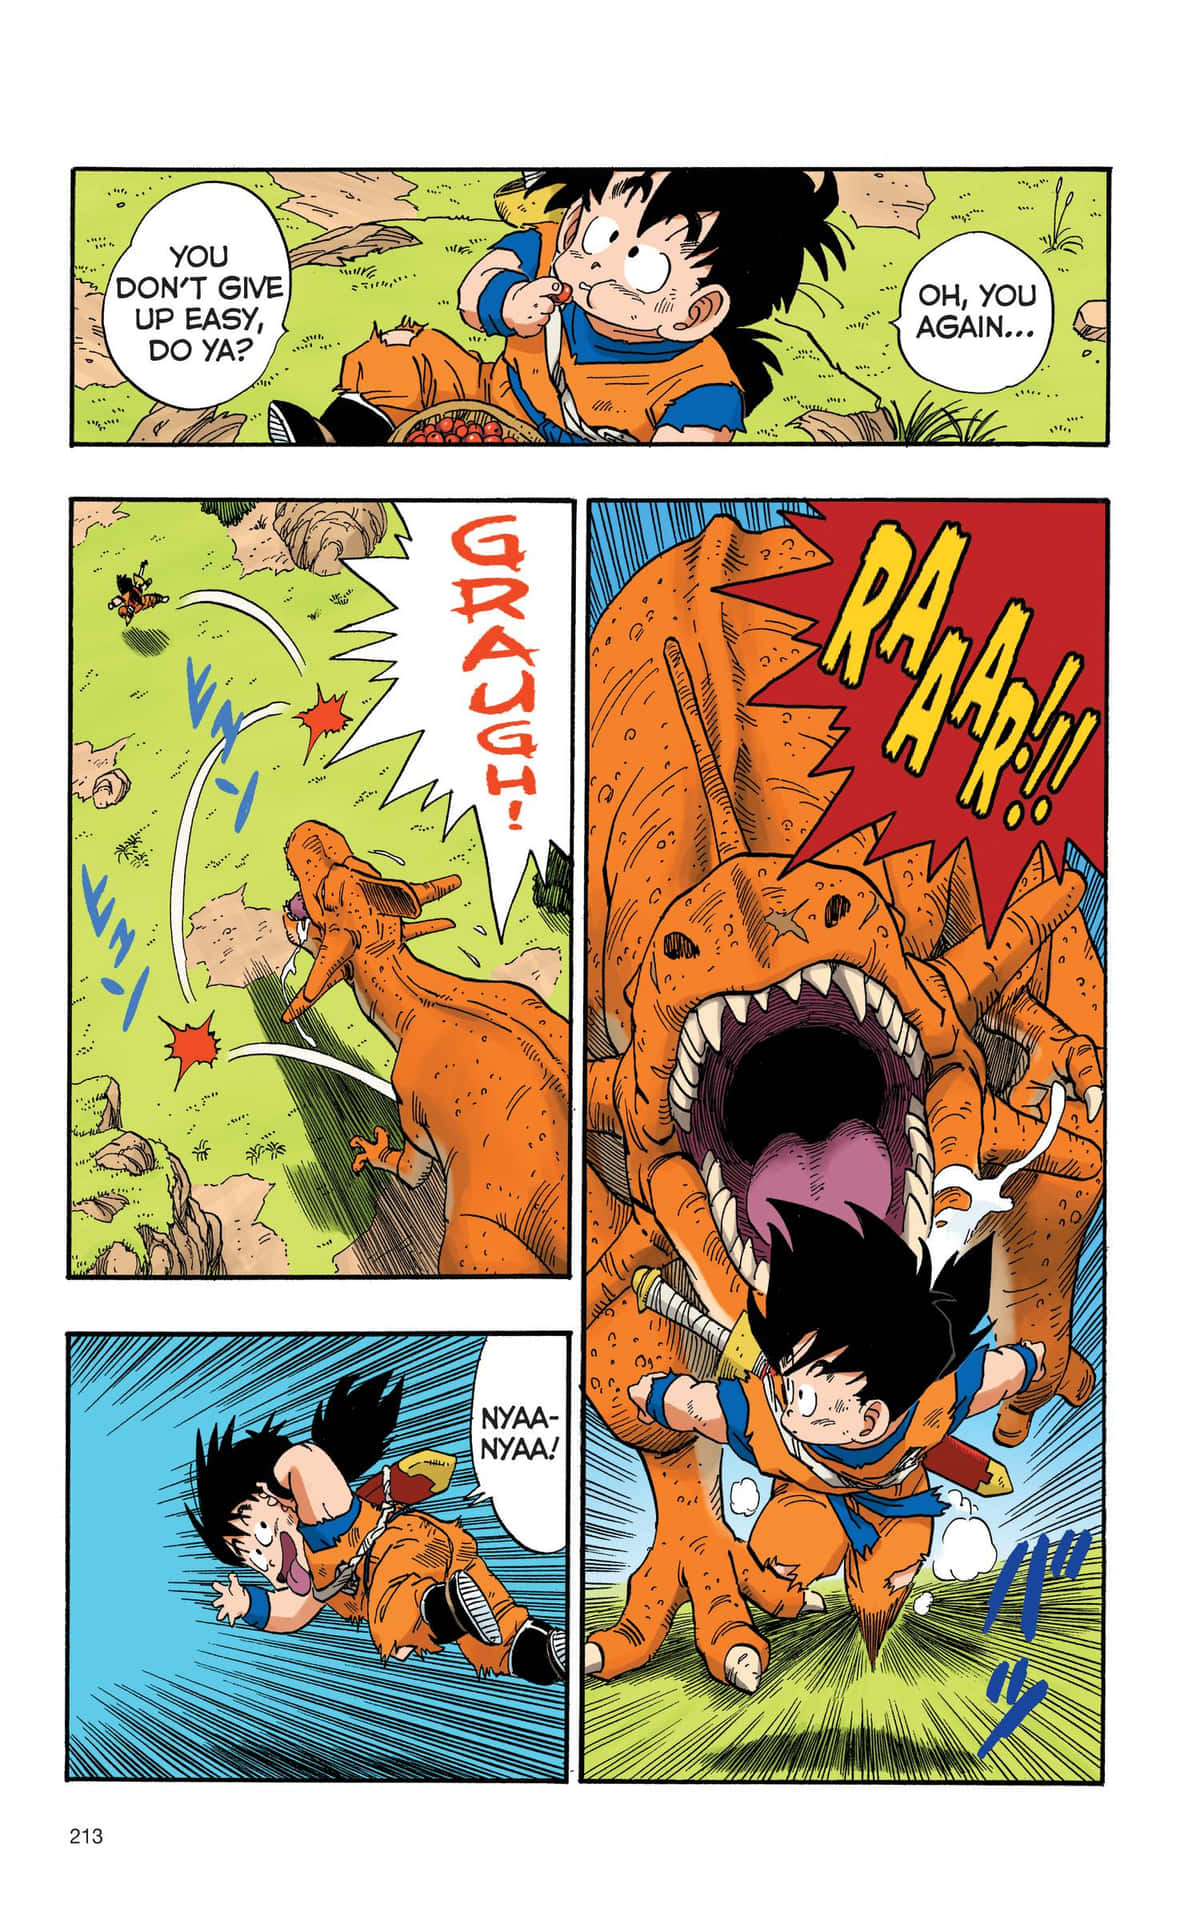 Goku and Vegeta ascend to Super Saiyan Blue as they battle evil forces in Dragon Ball Super Manga Wallpaper